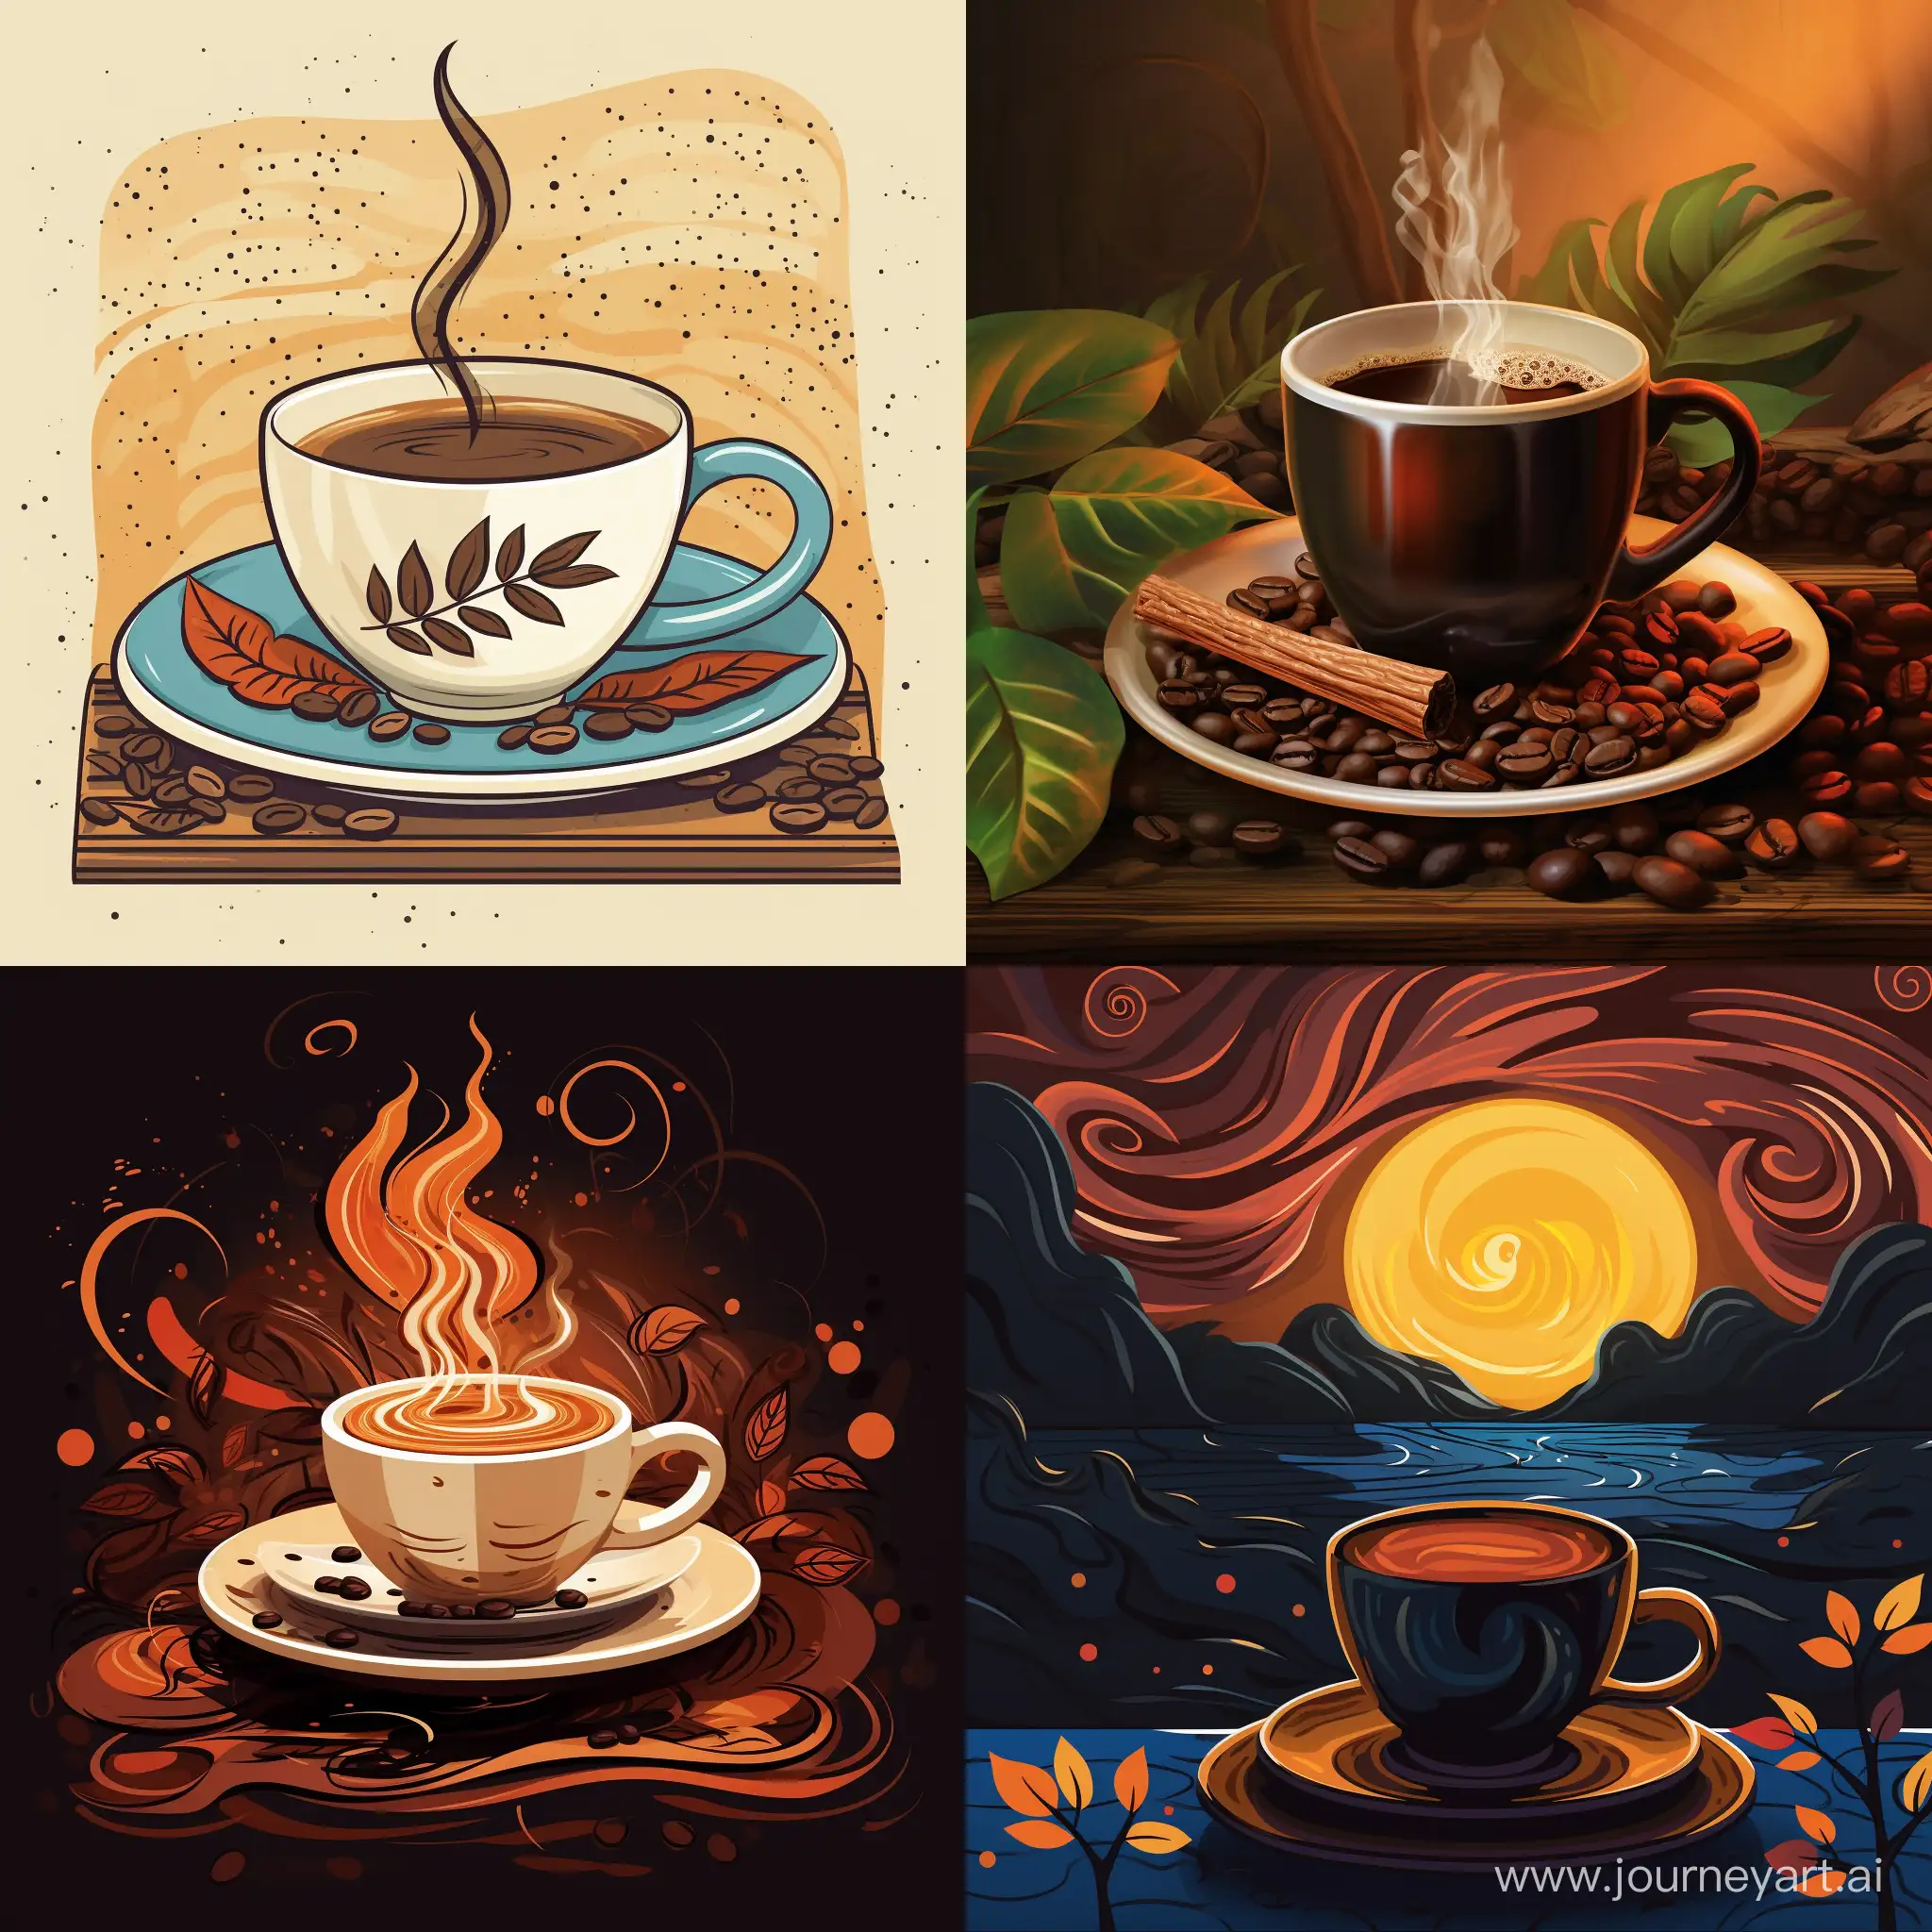 Artistic-Coffee-Cup-Poster-Design-in-Square-Format